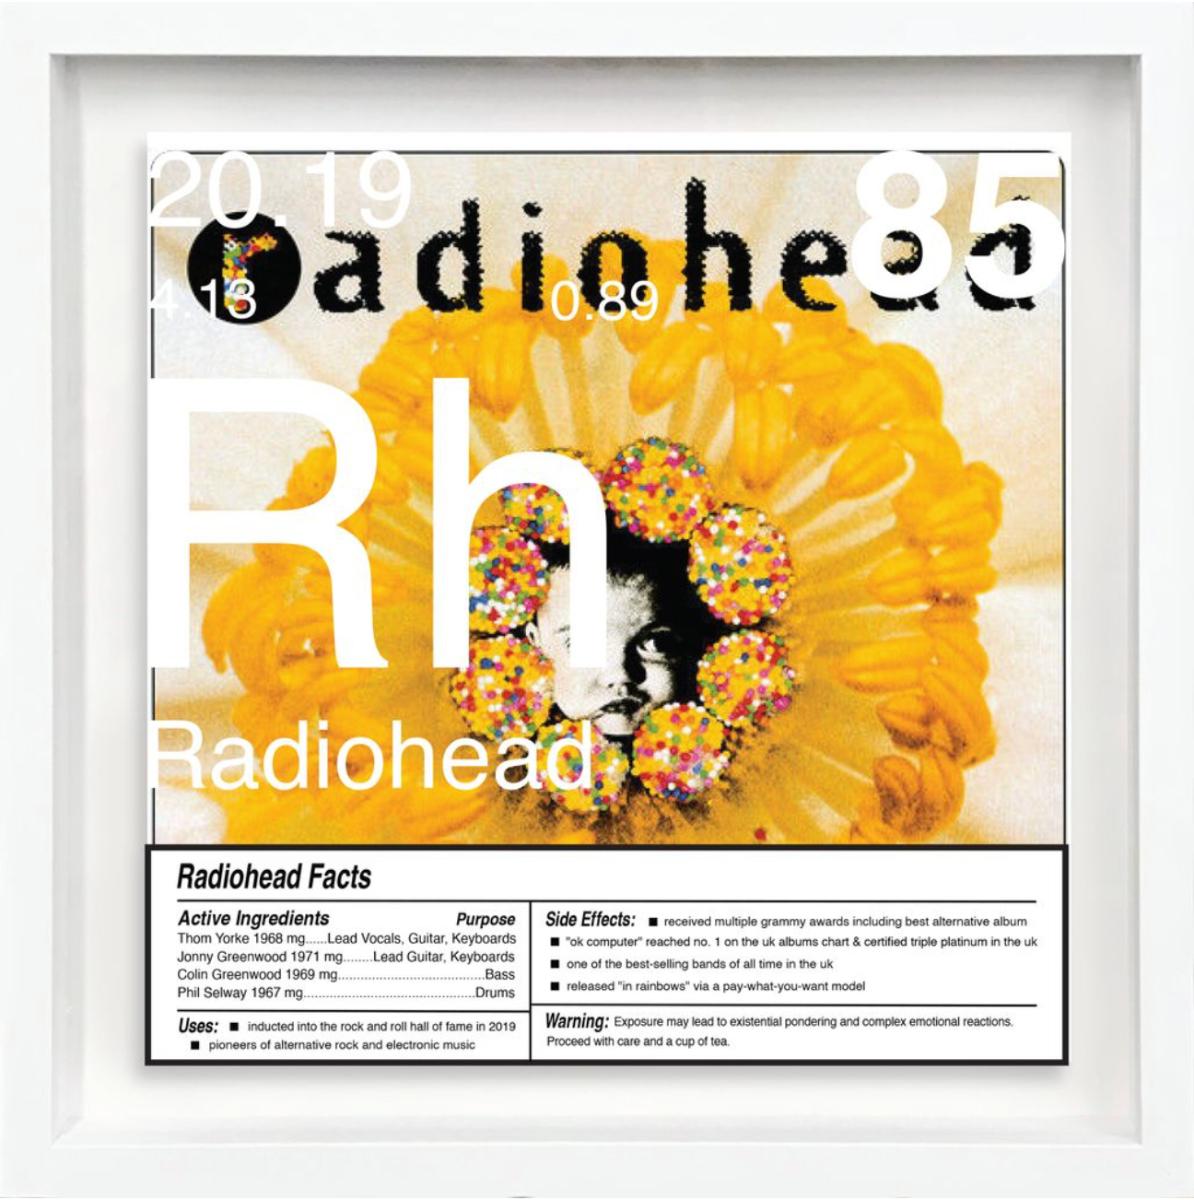 Radiohead_85 Limited edition 1/9

Daniel Allen Cohen, a Los Angeles-based artist renowned for his multidisciplinary approach, transforms popular culture into conceptual art. His creations are nuanced reflections of societal values, desires,